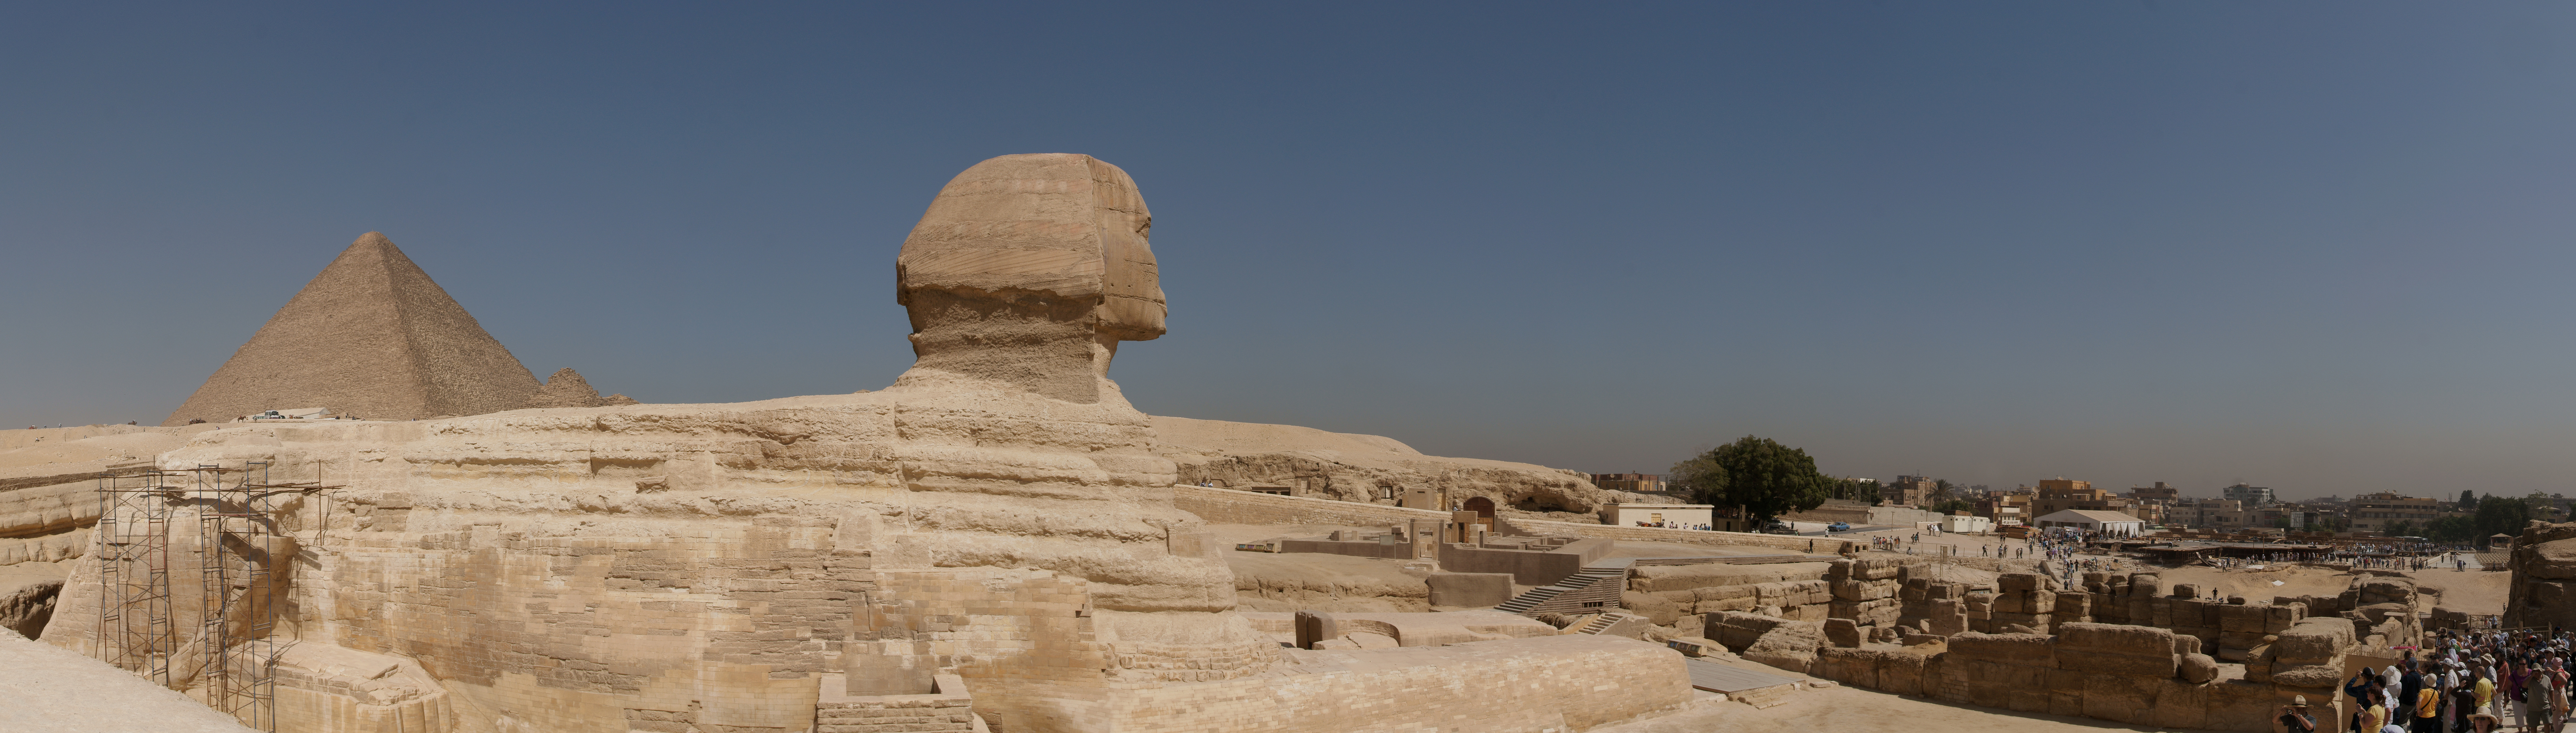 Panoramic view of the Great Sphinx and Pyramids of Giza. Photo taken on October 13, 2010.